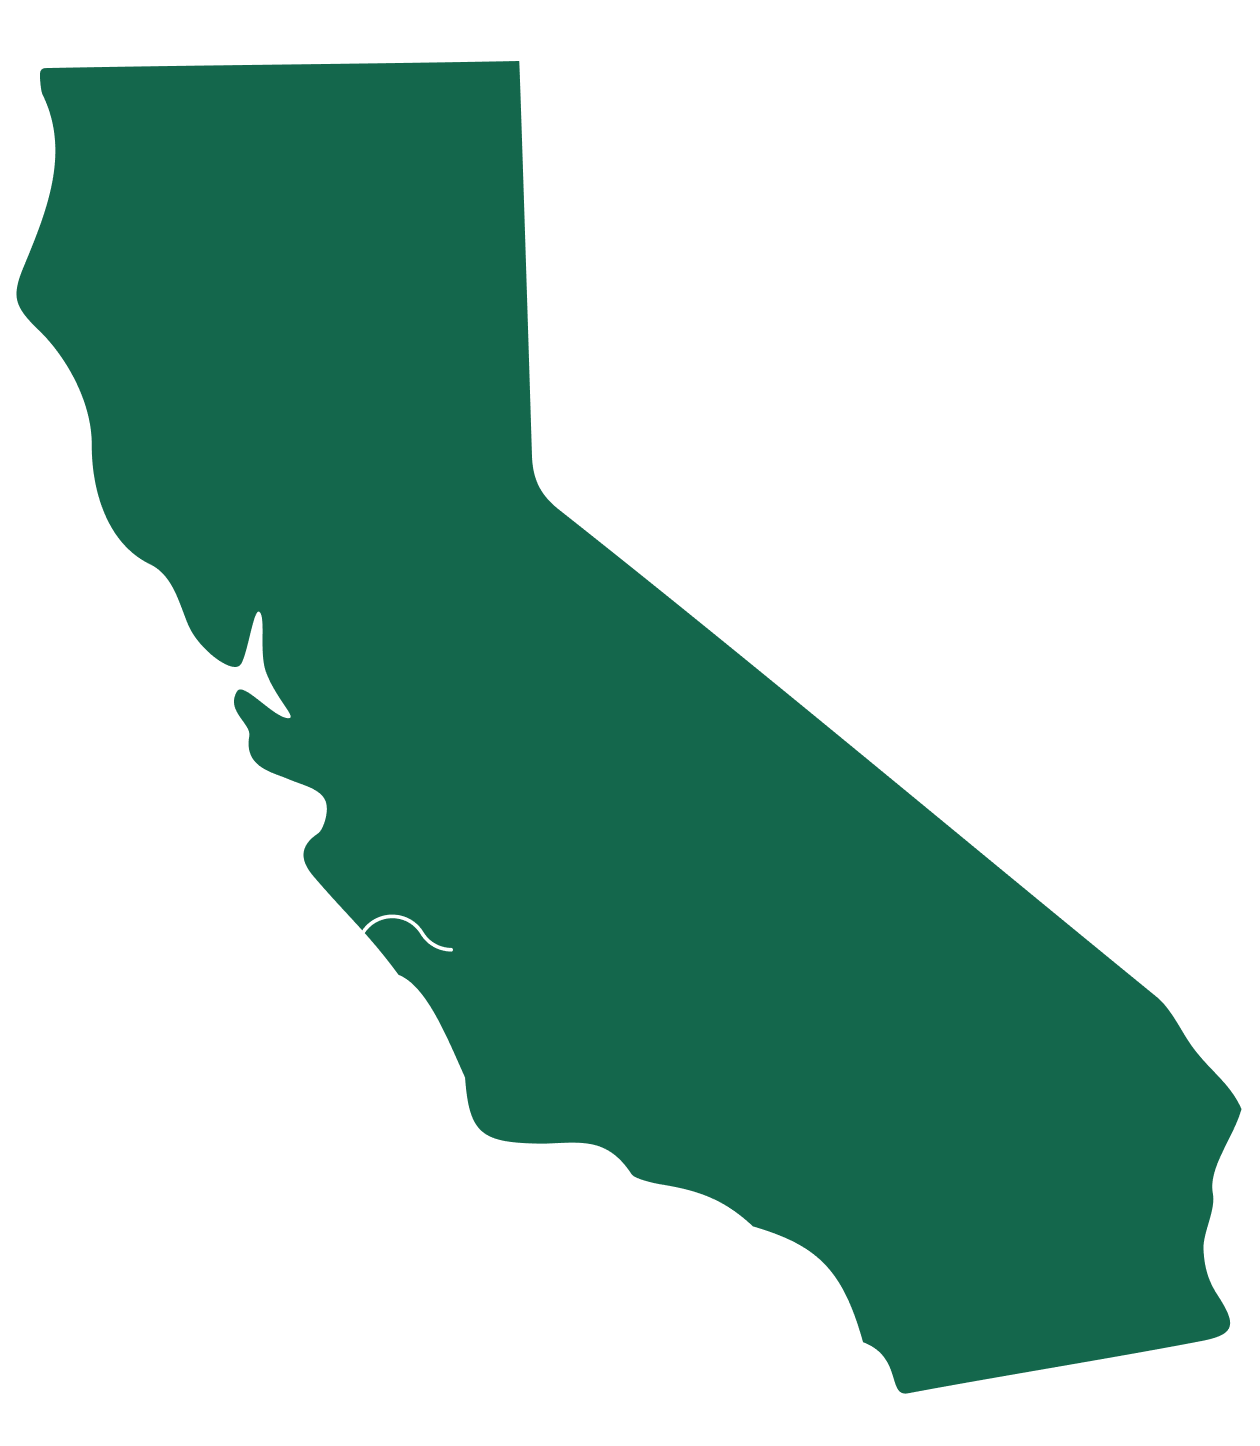 outline of state of California